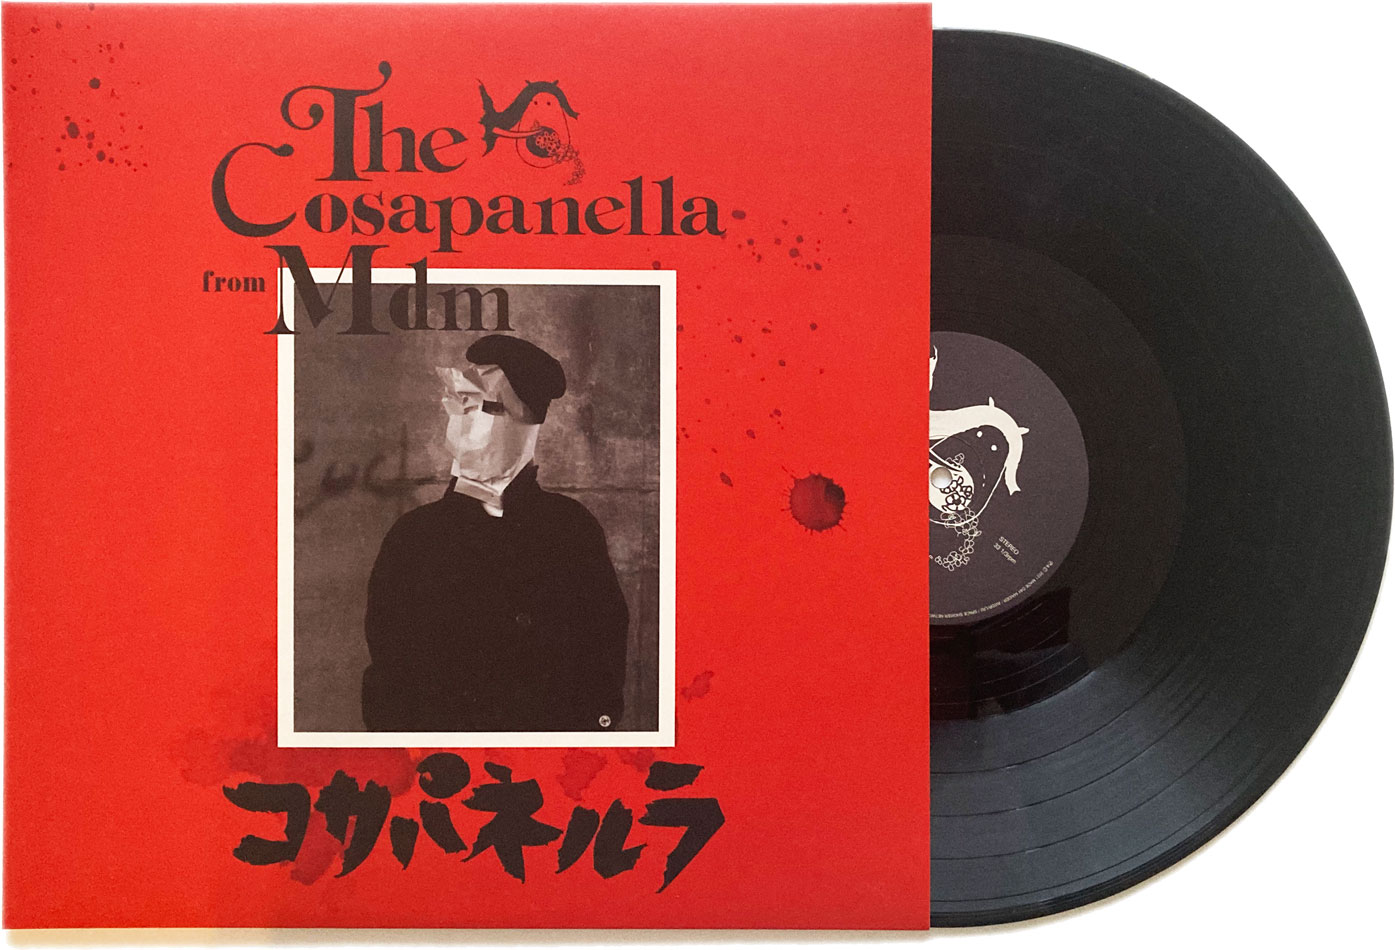 "The Cosapanella from Mdm" 12inch